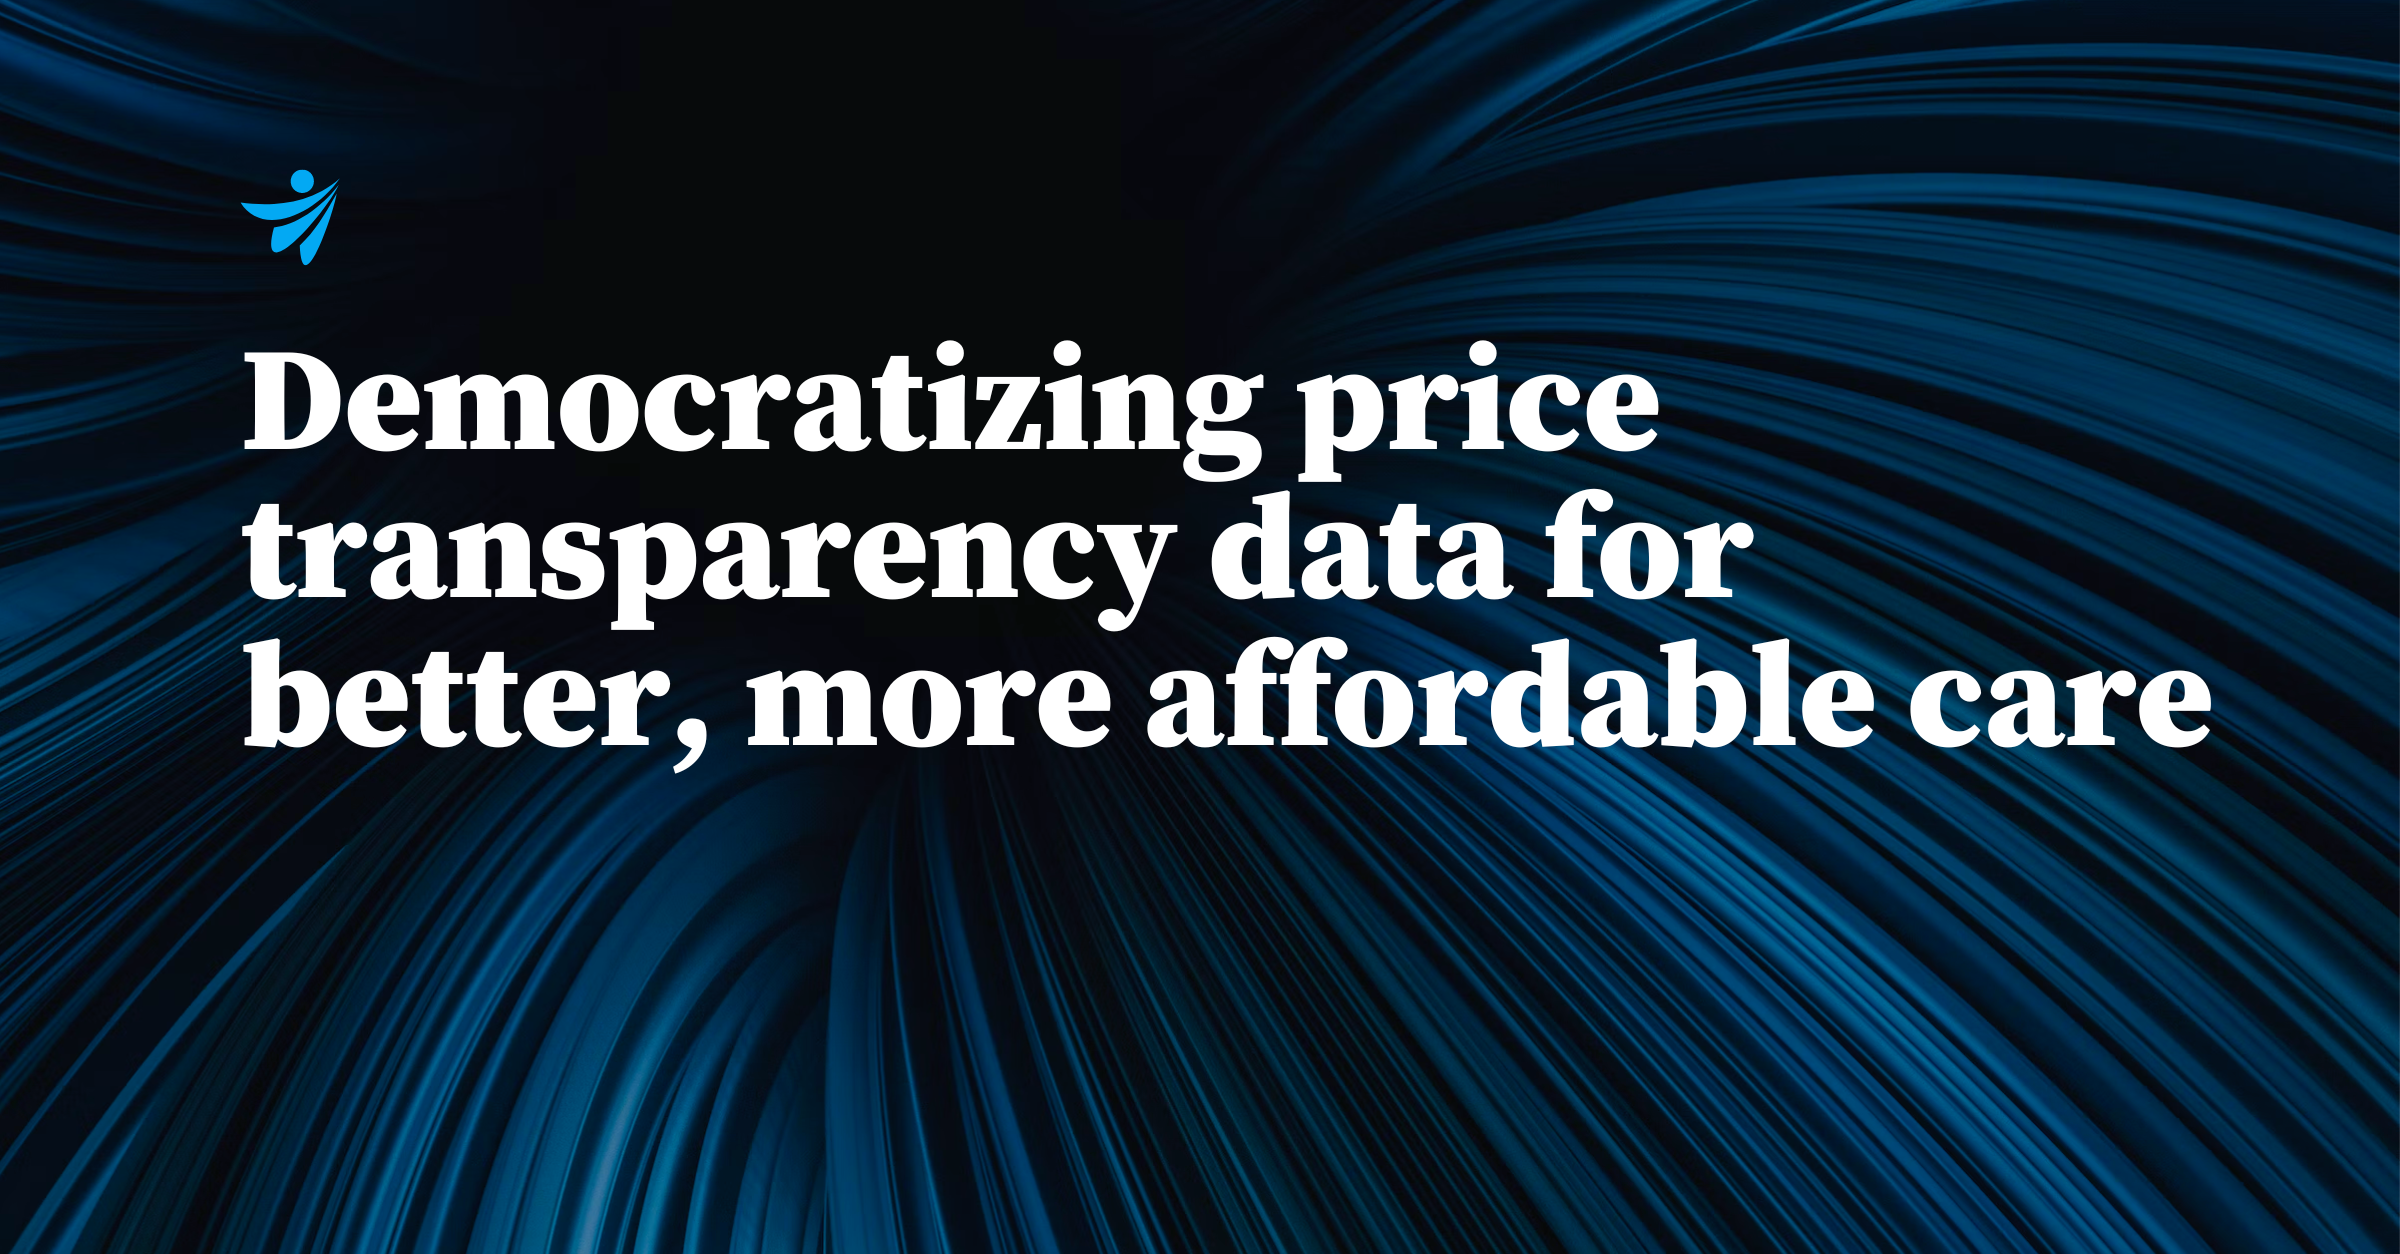 Democratizing price transparency data for better, more affordable care